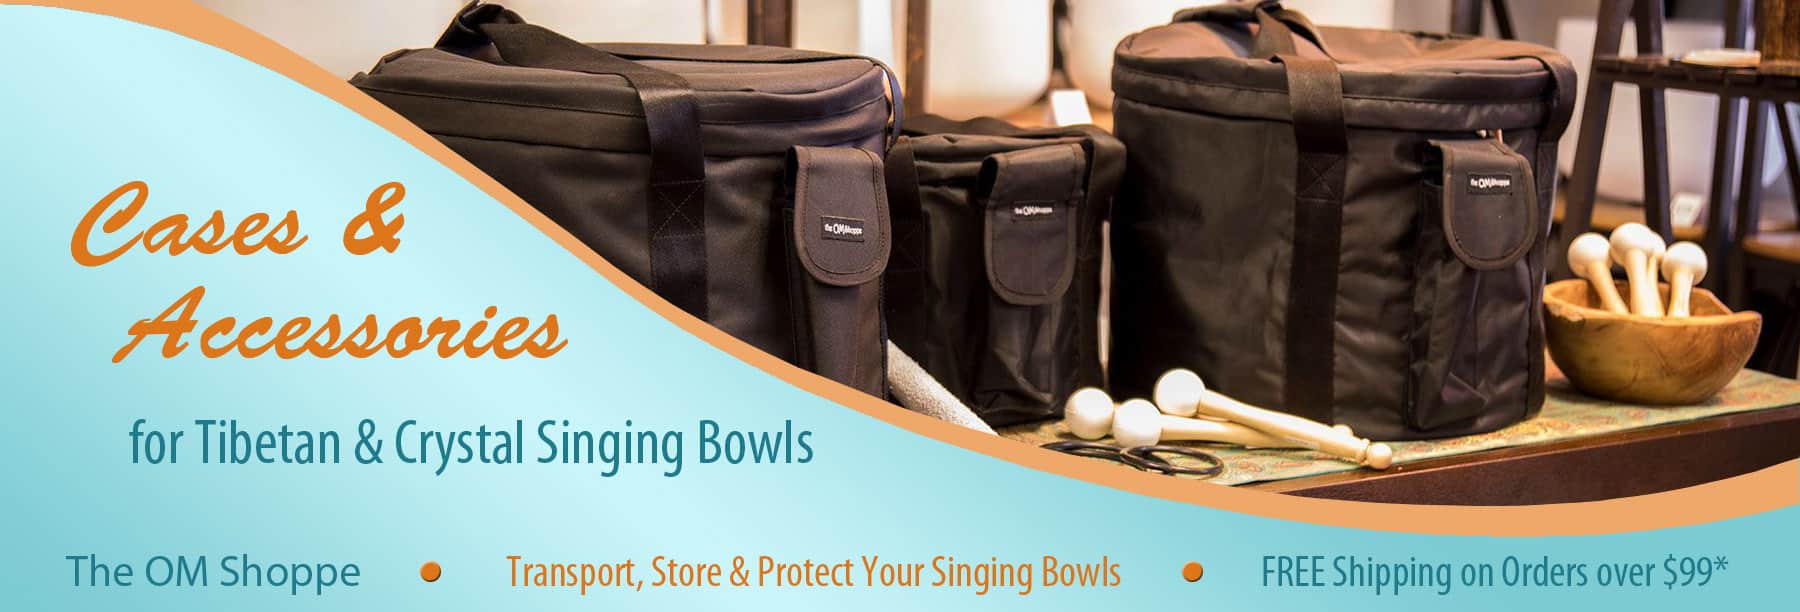 Crystal Singing Bowls Cases & Accessories - The OM Shoppe